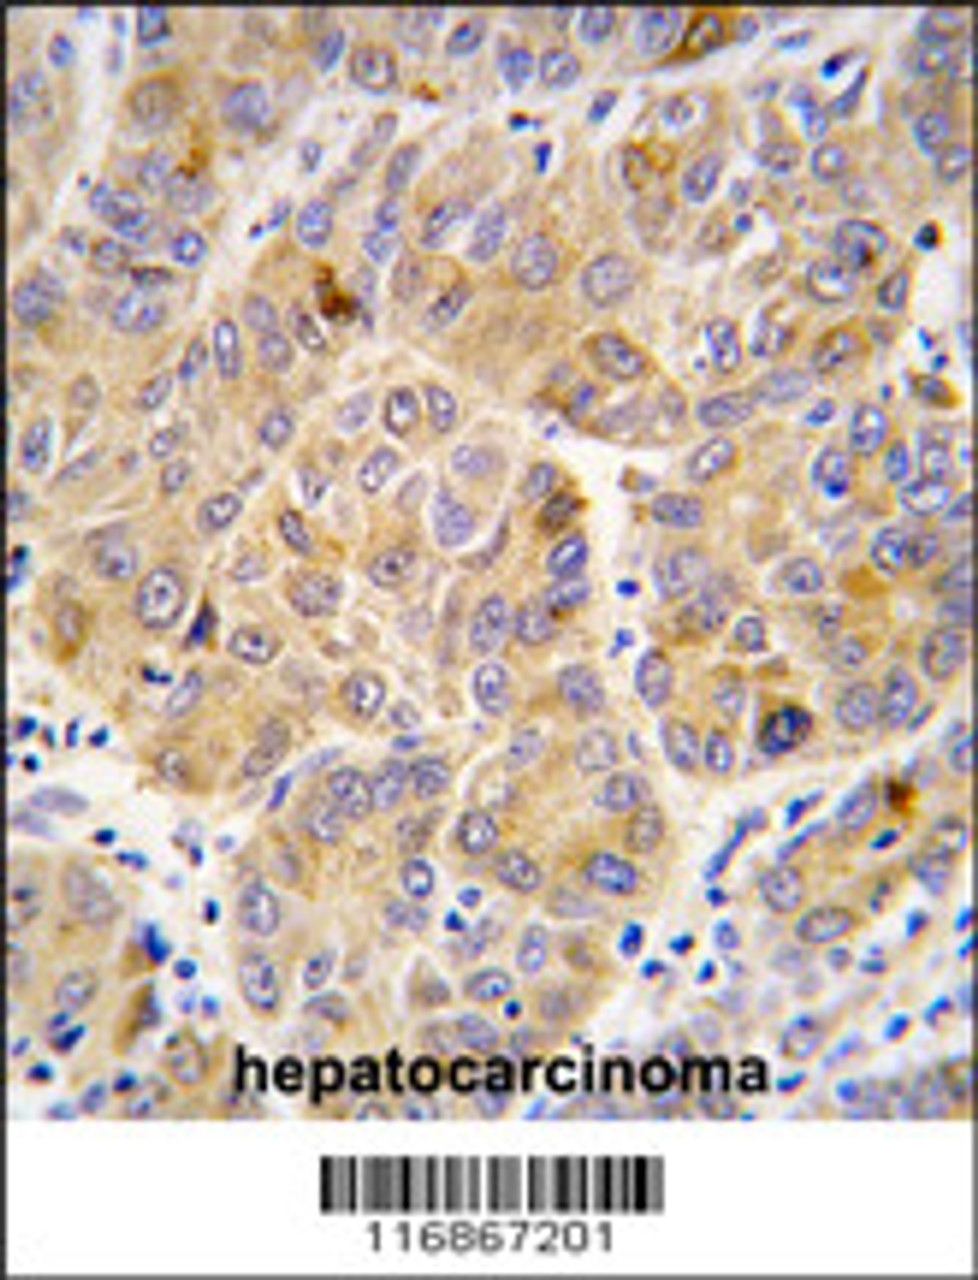 Formalin-fixed and paraffin-embedded human hepatocarcinoma tissue reacted with ALDH9A1 antibody, which was peroxidase-conjugated to the secondary antibody, followed by DAB staining.